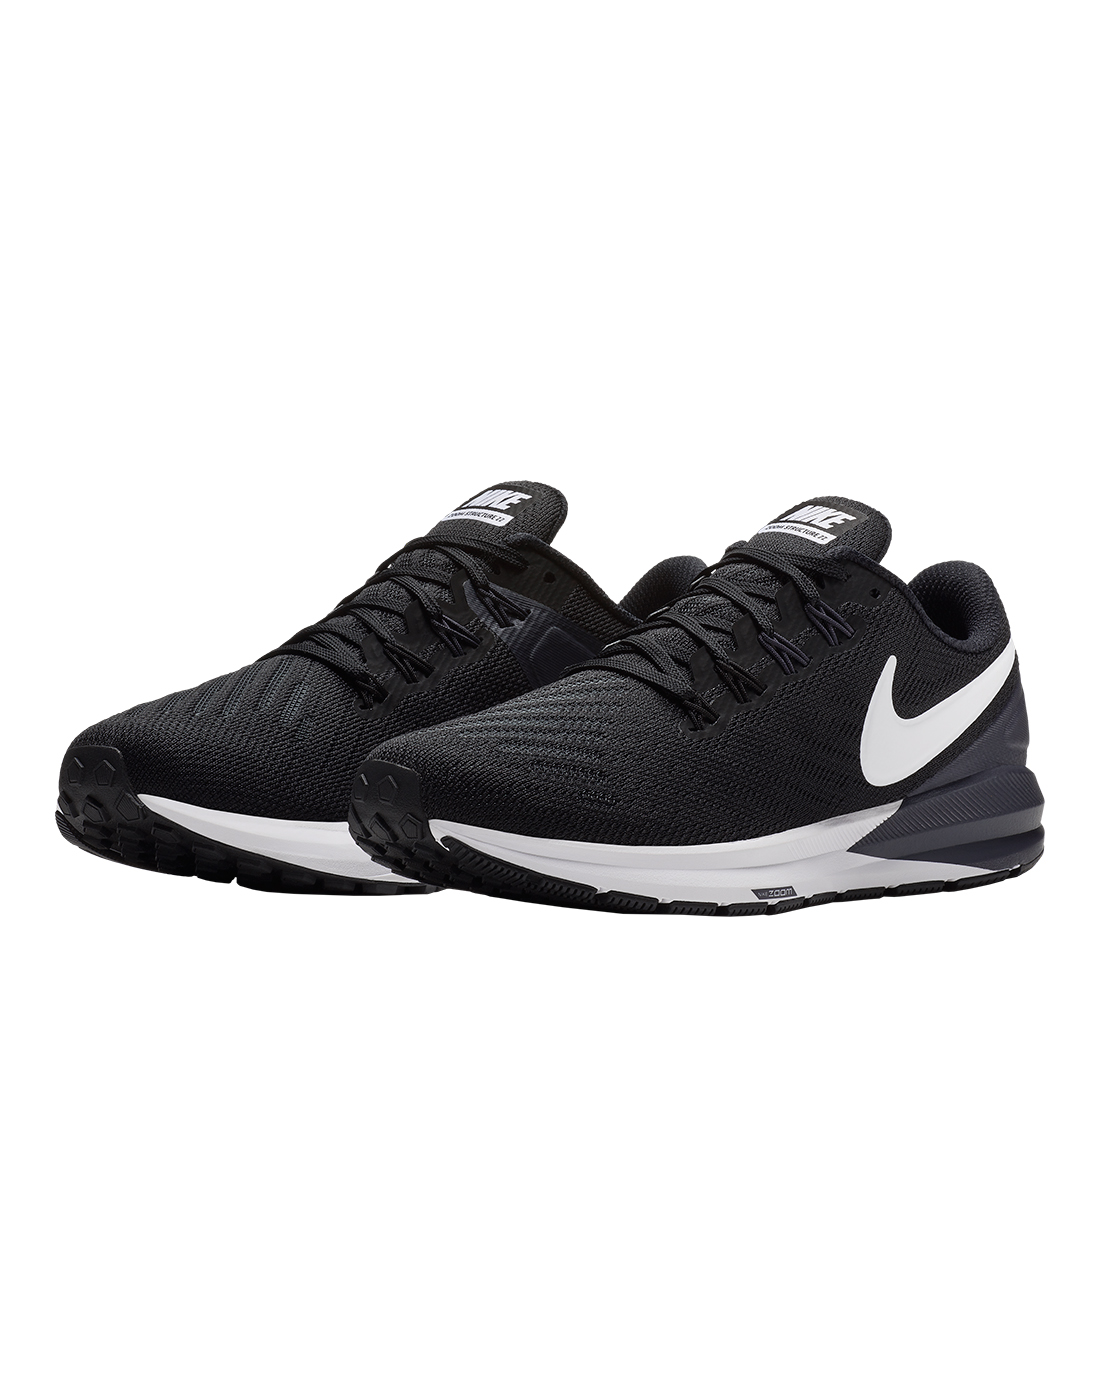 Nike Womens Air Zoom Structure 22 - Black | Life Style Sports IE